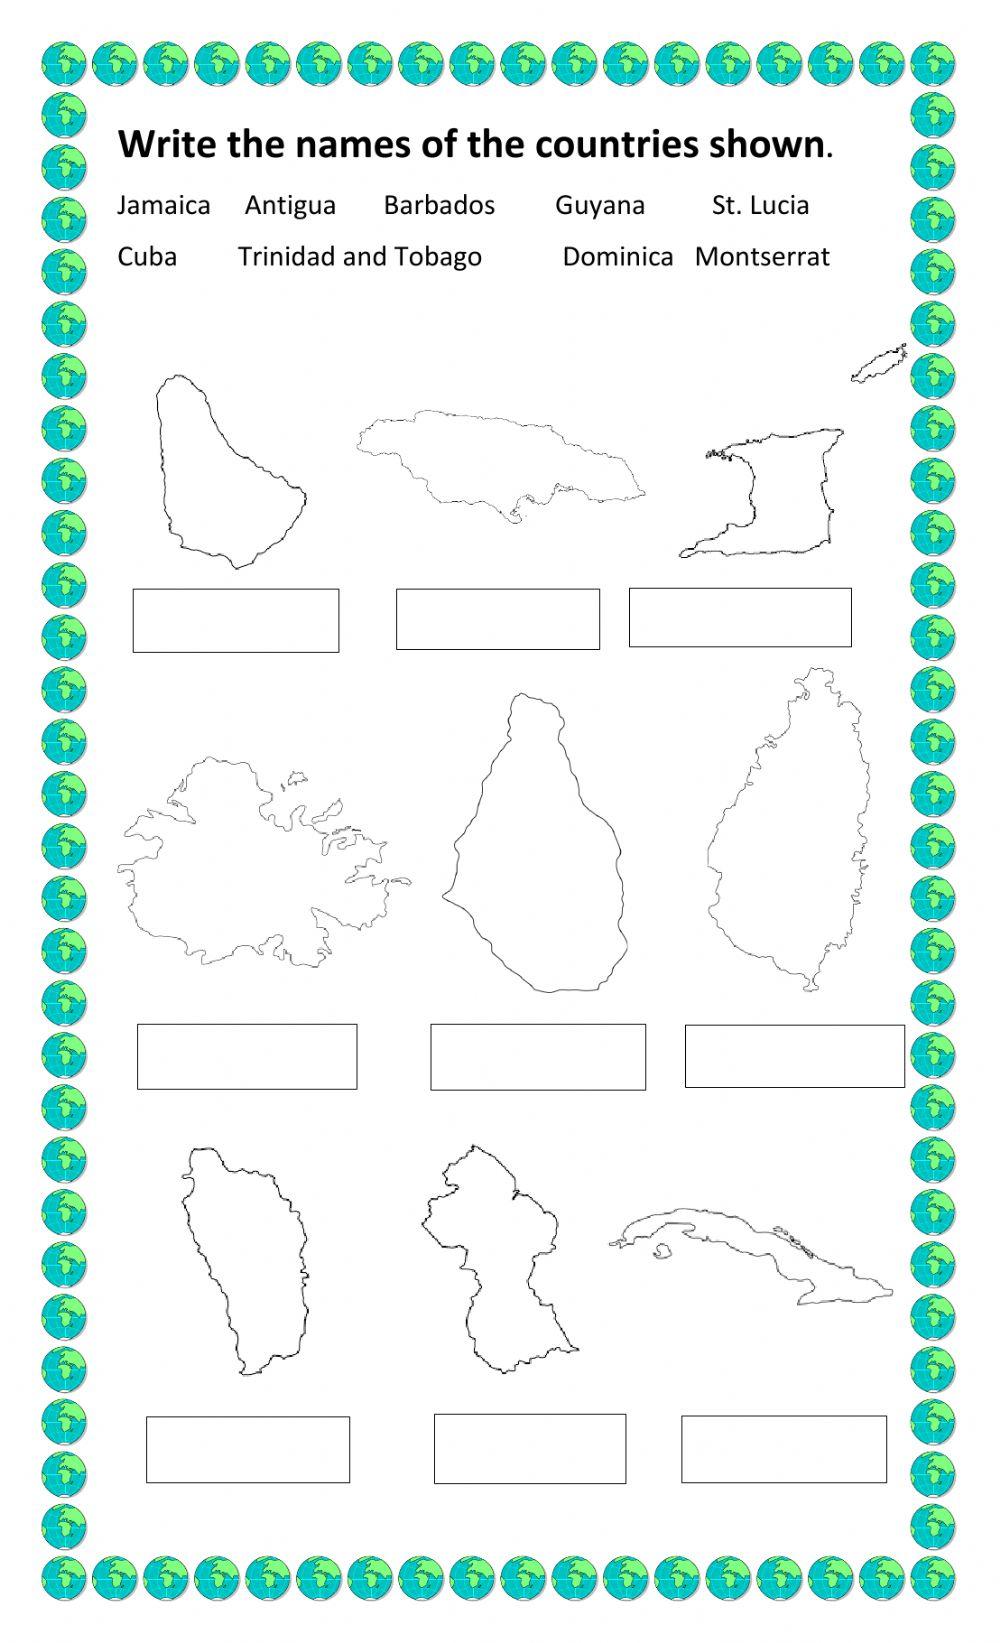 Maps of Caribbean Countries